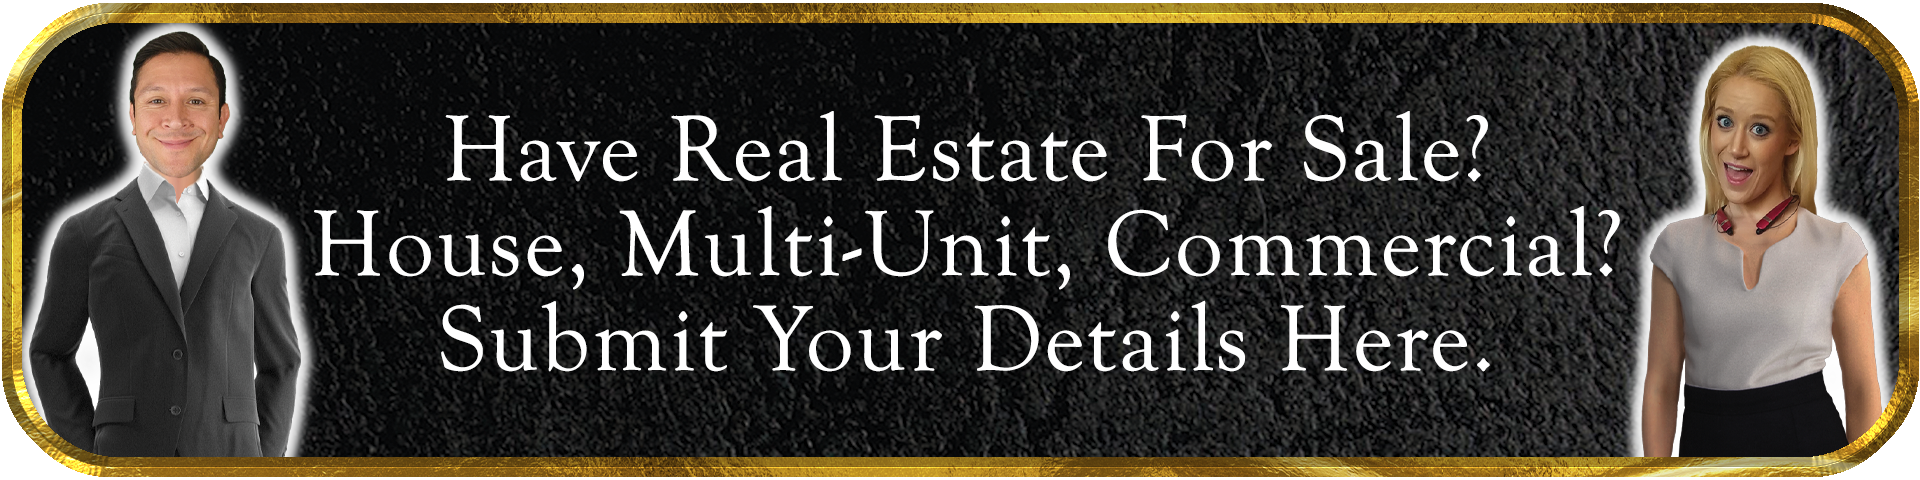 submit-your-real-estate-property-details-here.jpg